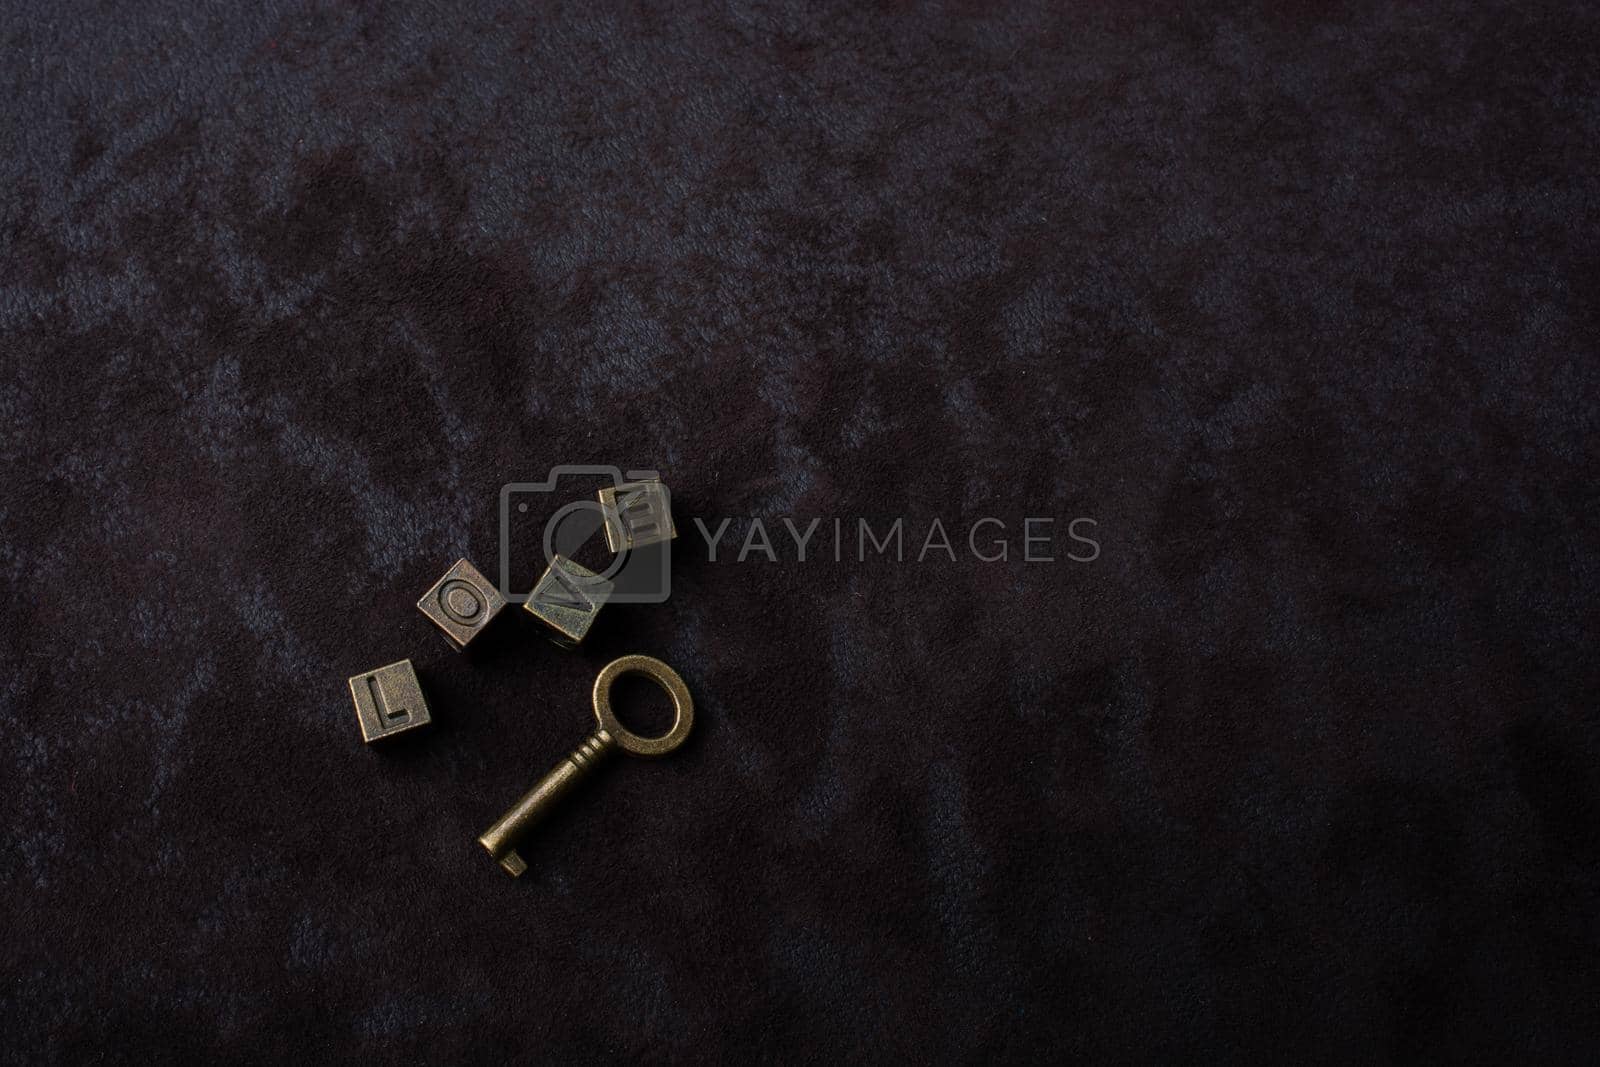 Royalty free image of Key and love wording on a dark background by berkay